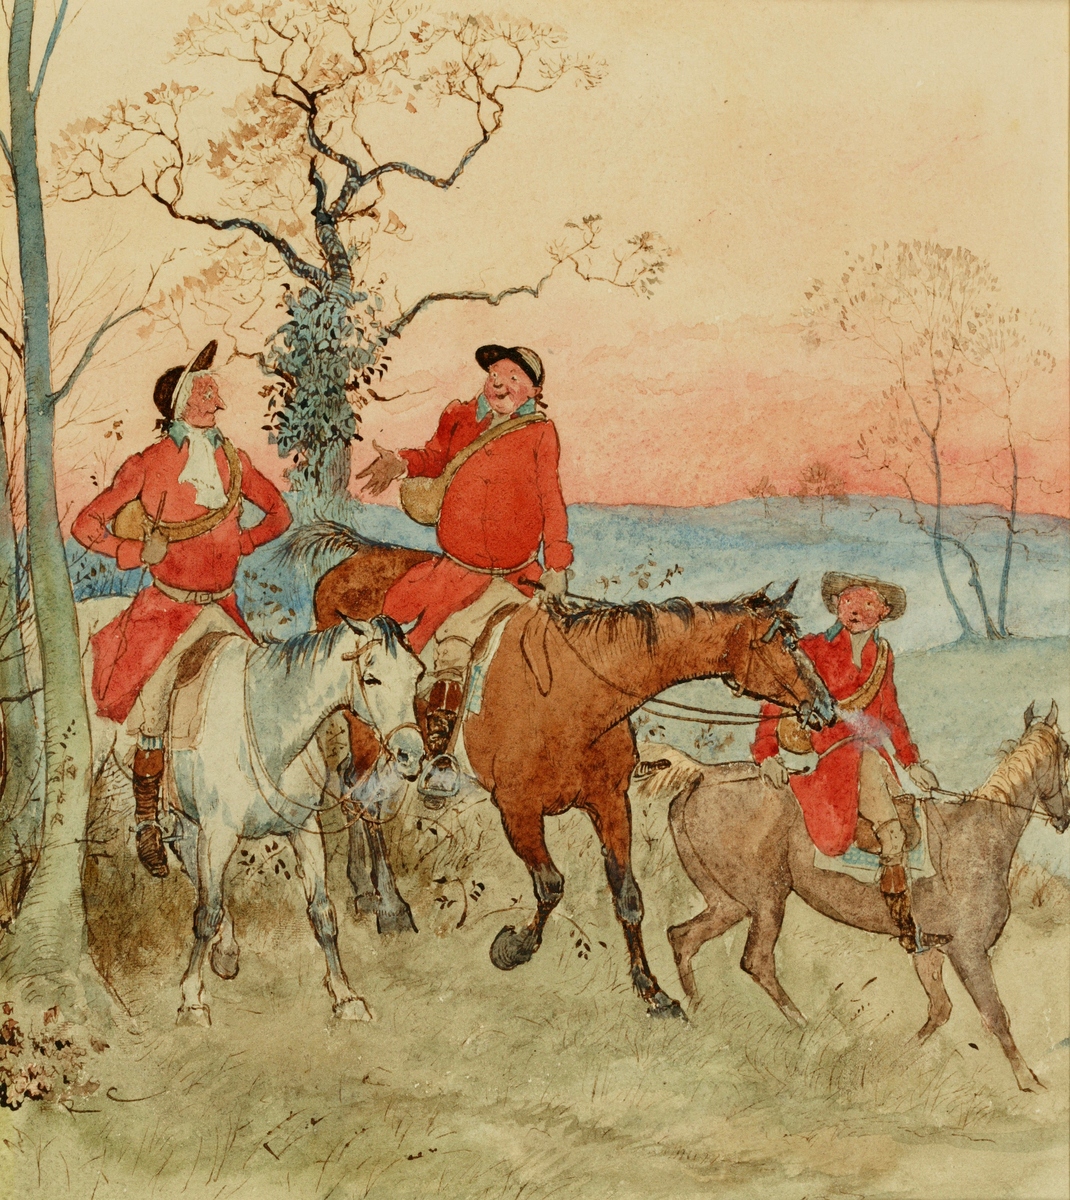 'So They Hunted, An' They Hollo'd, till the Setting of the Sun'  (Illustration for 'The Three Jovial Huntsmen Picture Book No.5 publ. 1880)